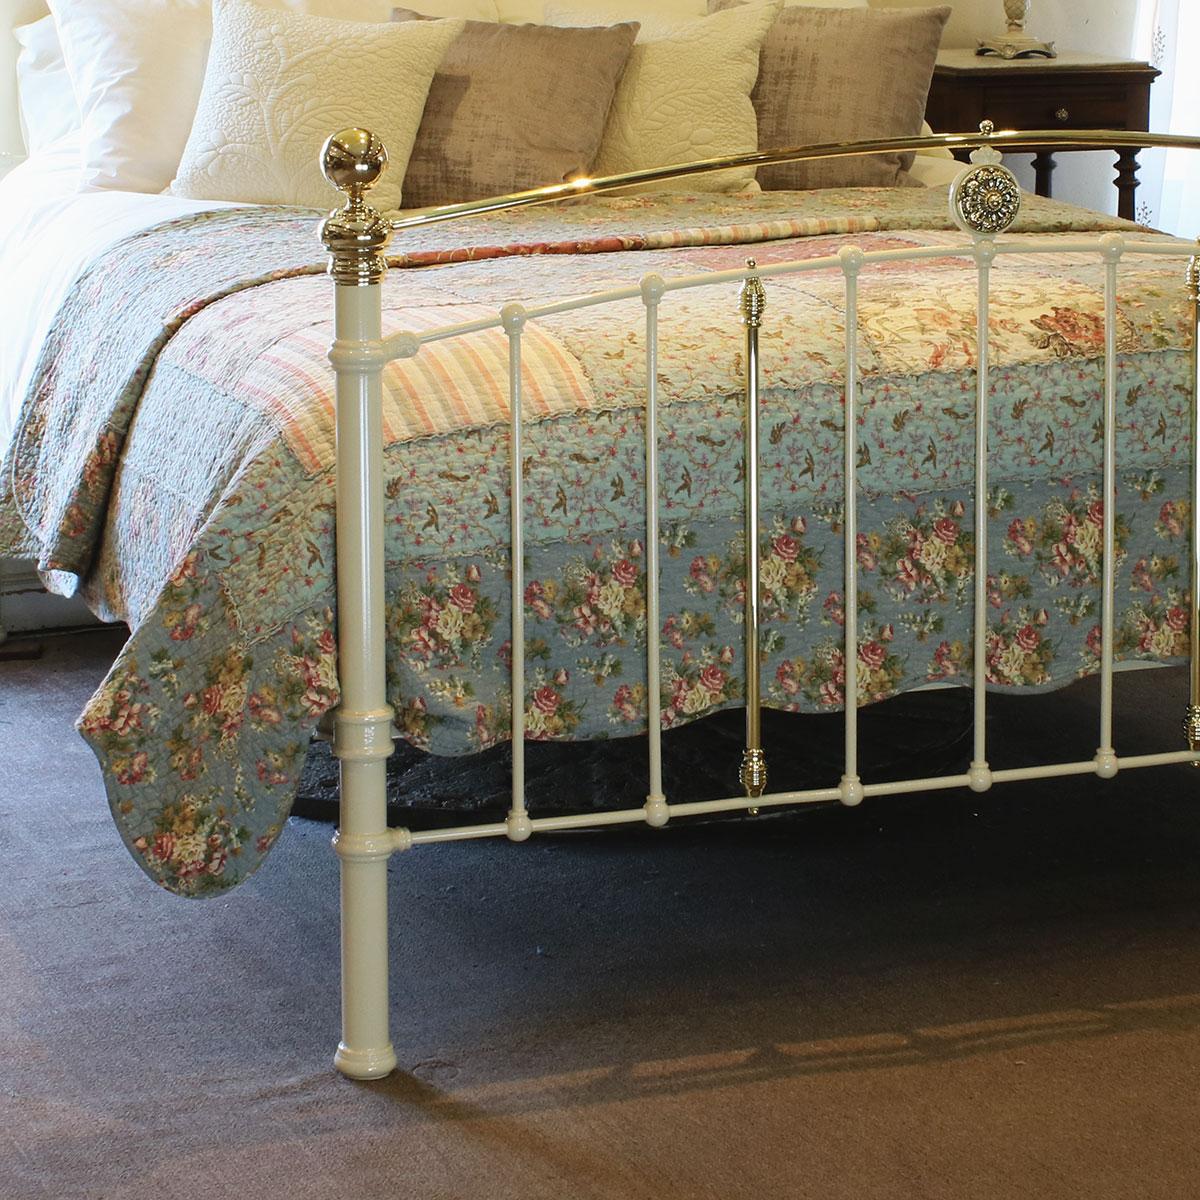 Antique bed in cream with convex brass top rail, decorative central brass castings and brass kneecaps.

This bed accepts a UK King size or US Queen size (5ft, 60in or 150cm wide) base and mattress set.

The price includes a standard firm bed base to